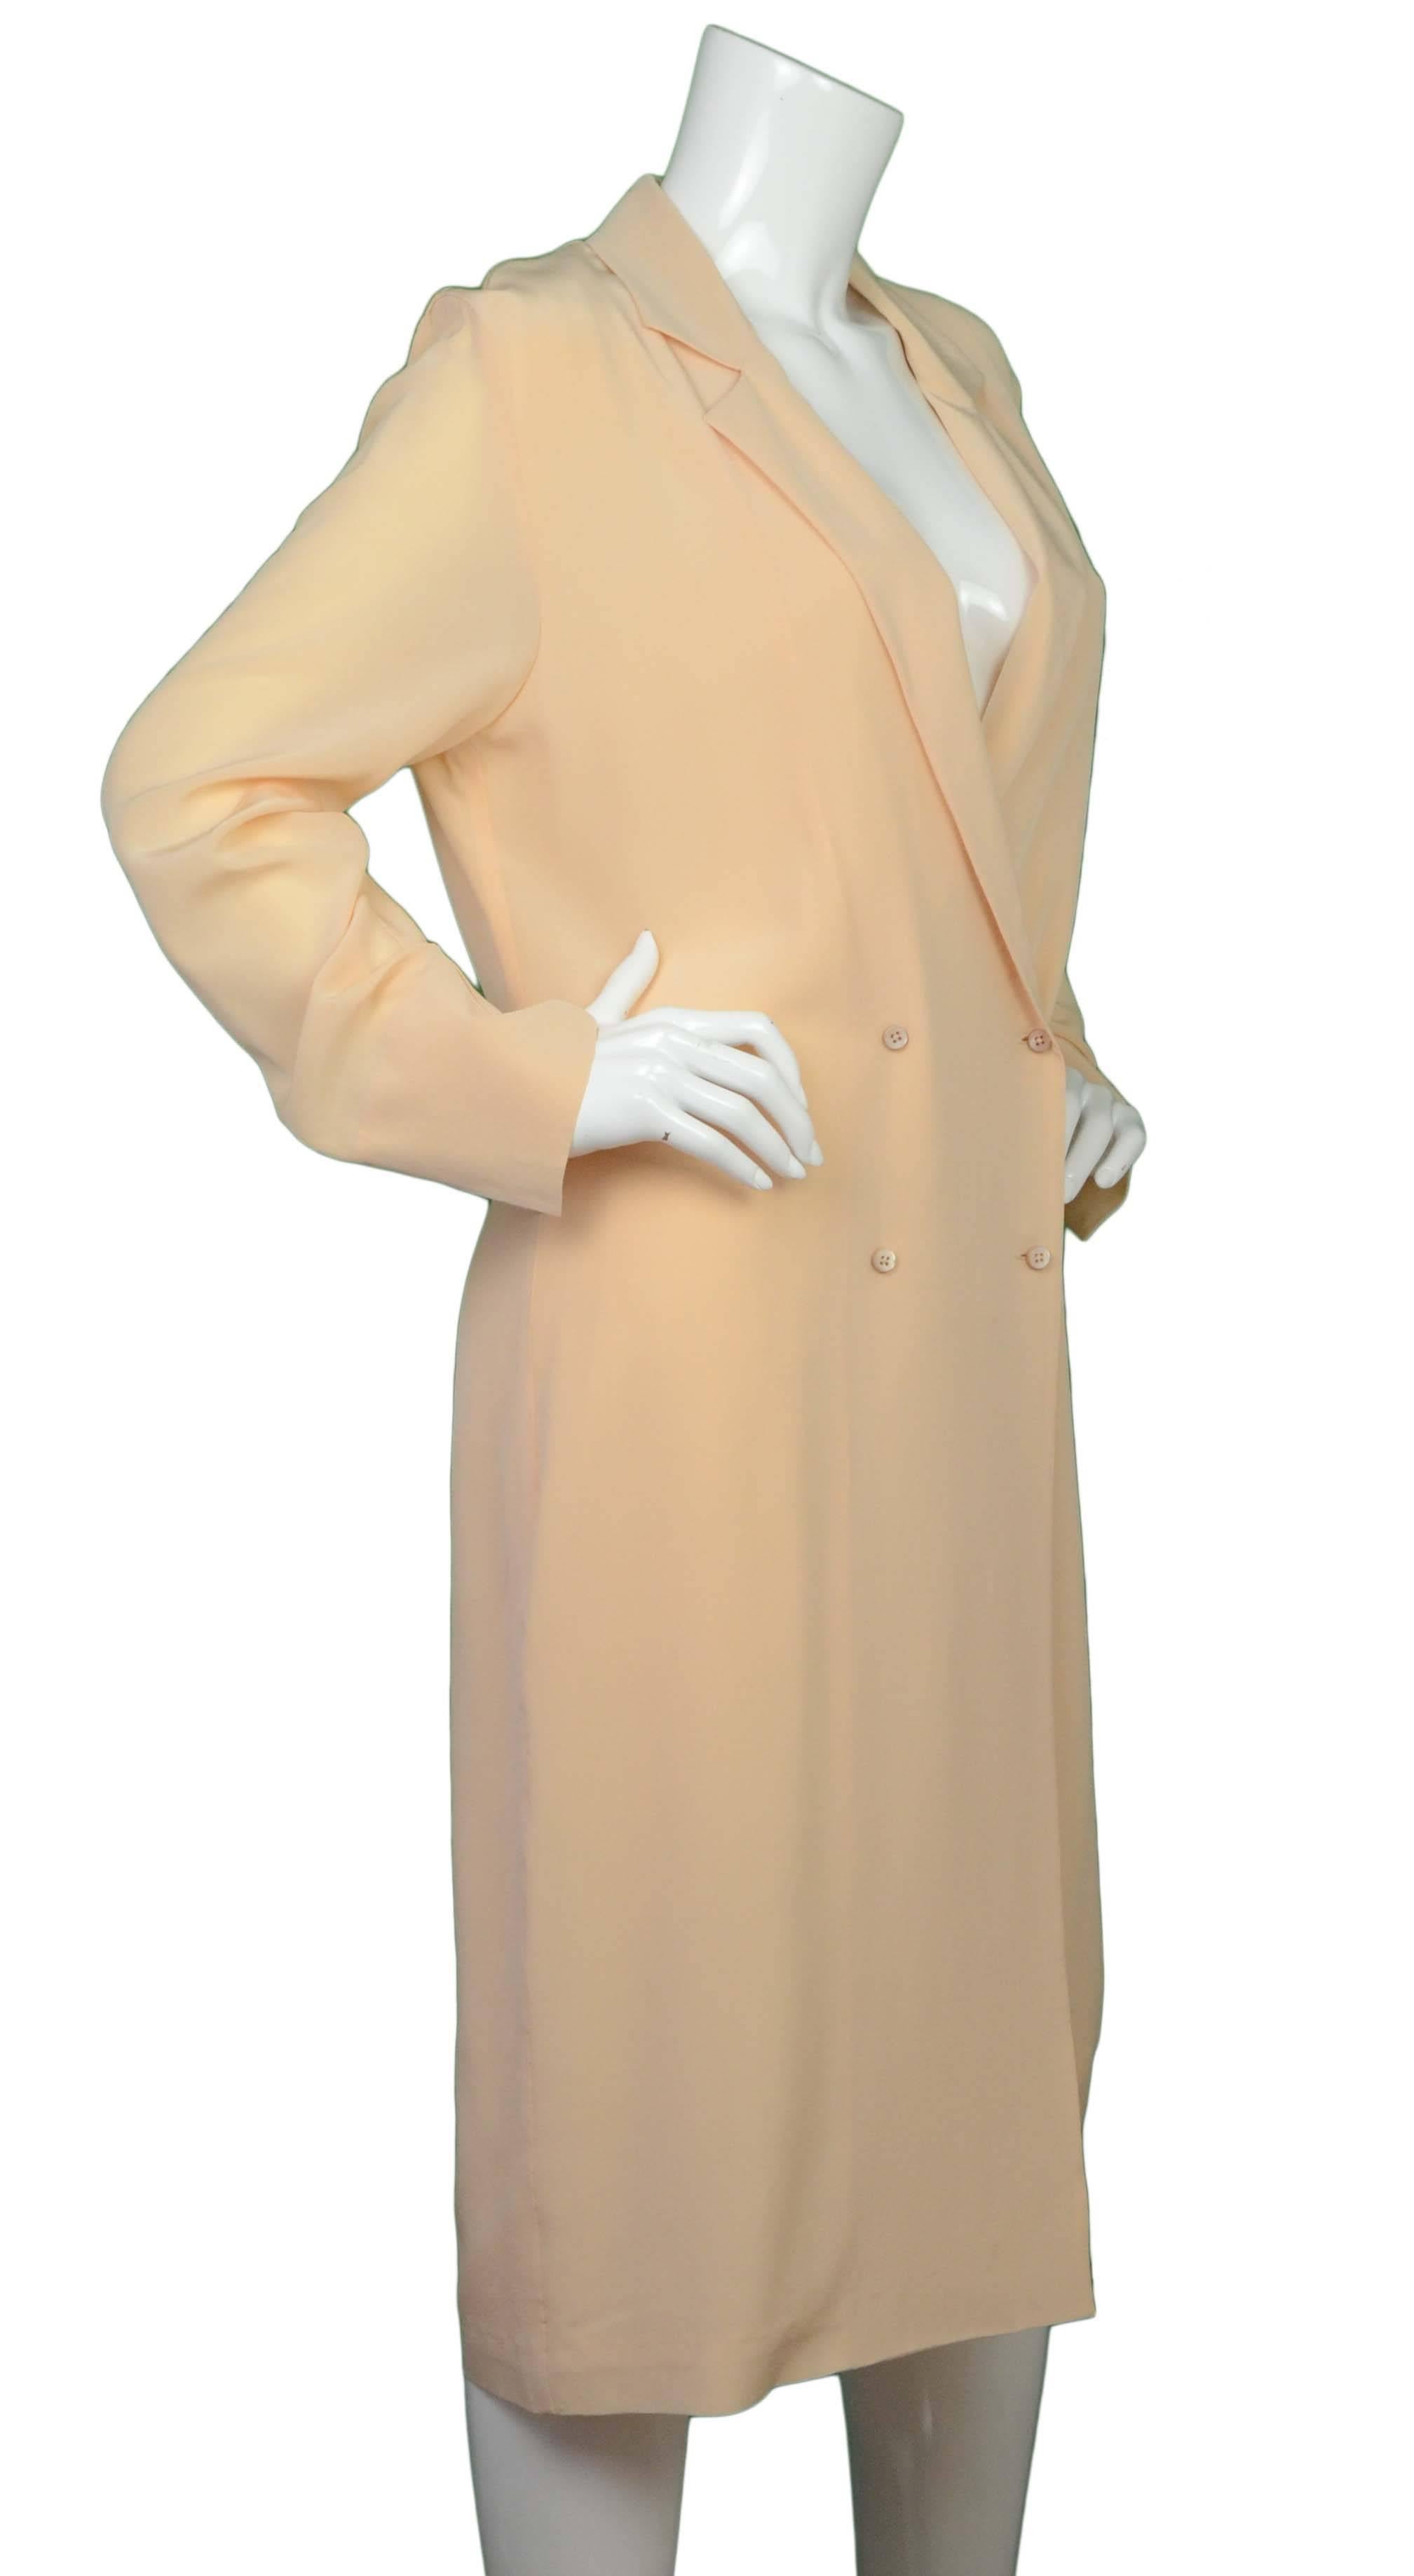 Maison Martin Margiela Peach Crepe de Chine Dress/Coat 
Made In: Italy
Color: Peach
Composition: 100% silk
Lining: Peach, 54% acetate, 28% polyamide, 20% silk
Closure/Opening: Double breasted button down front
Exterior Pockets: None
Interior